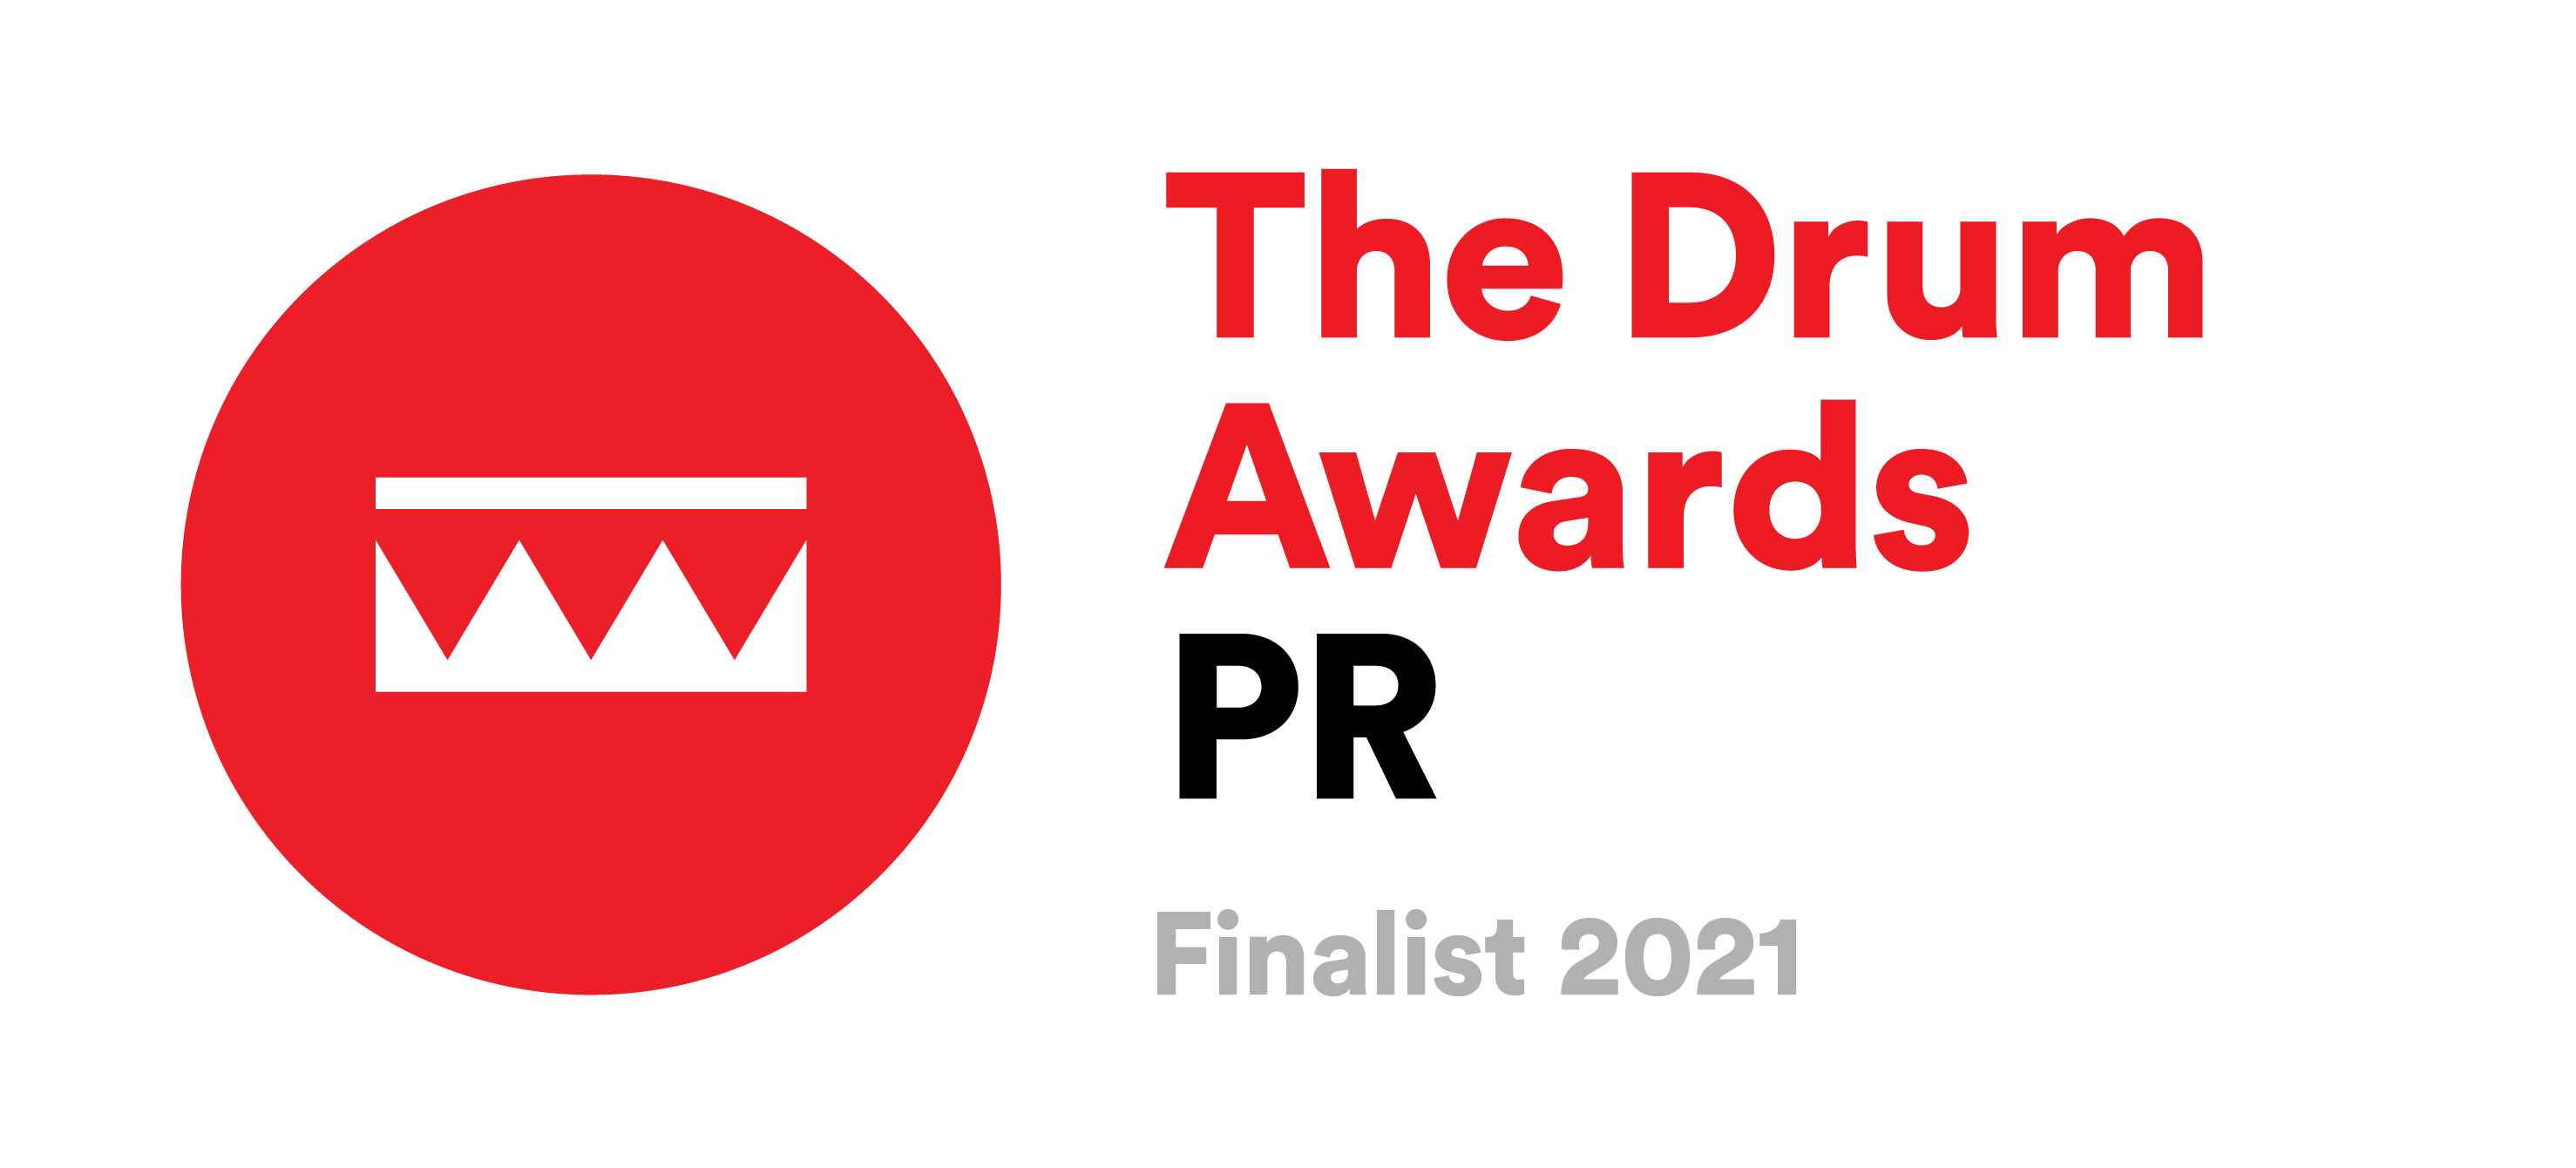 The Drum Awards for PR logo and finalist badge 2021